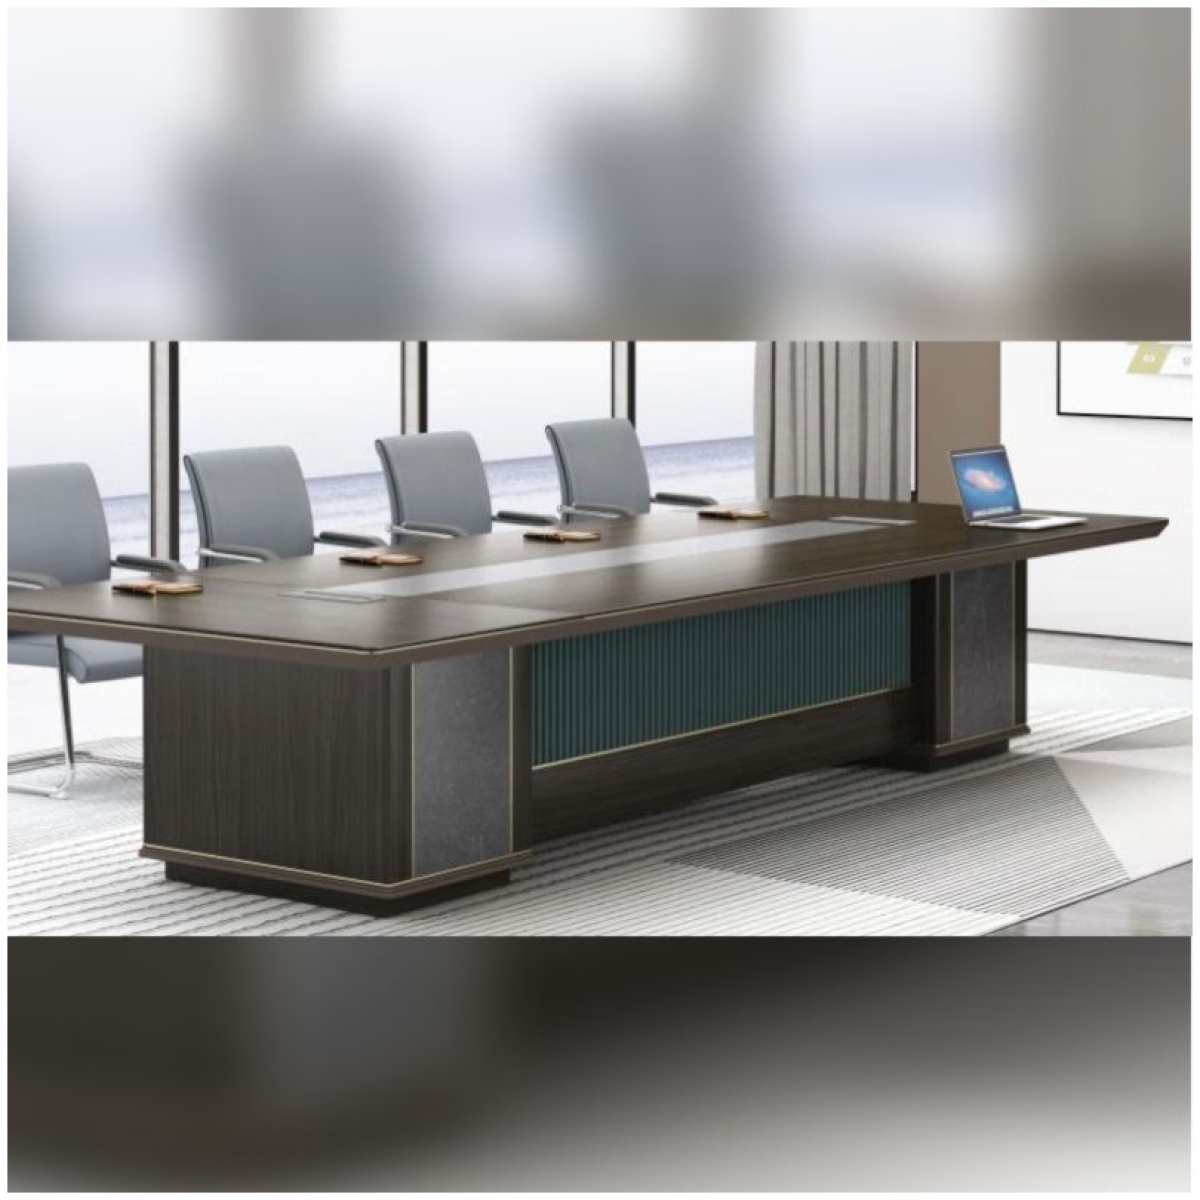 Conference Table (BG161)